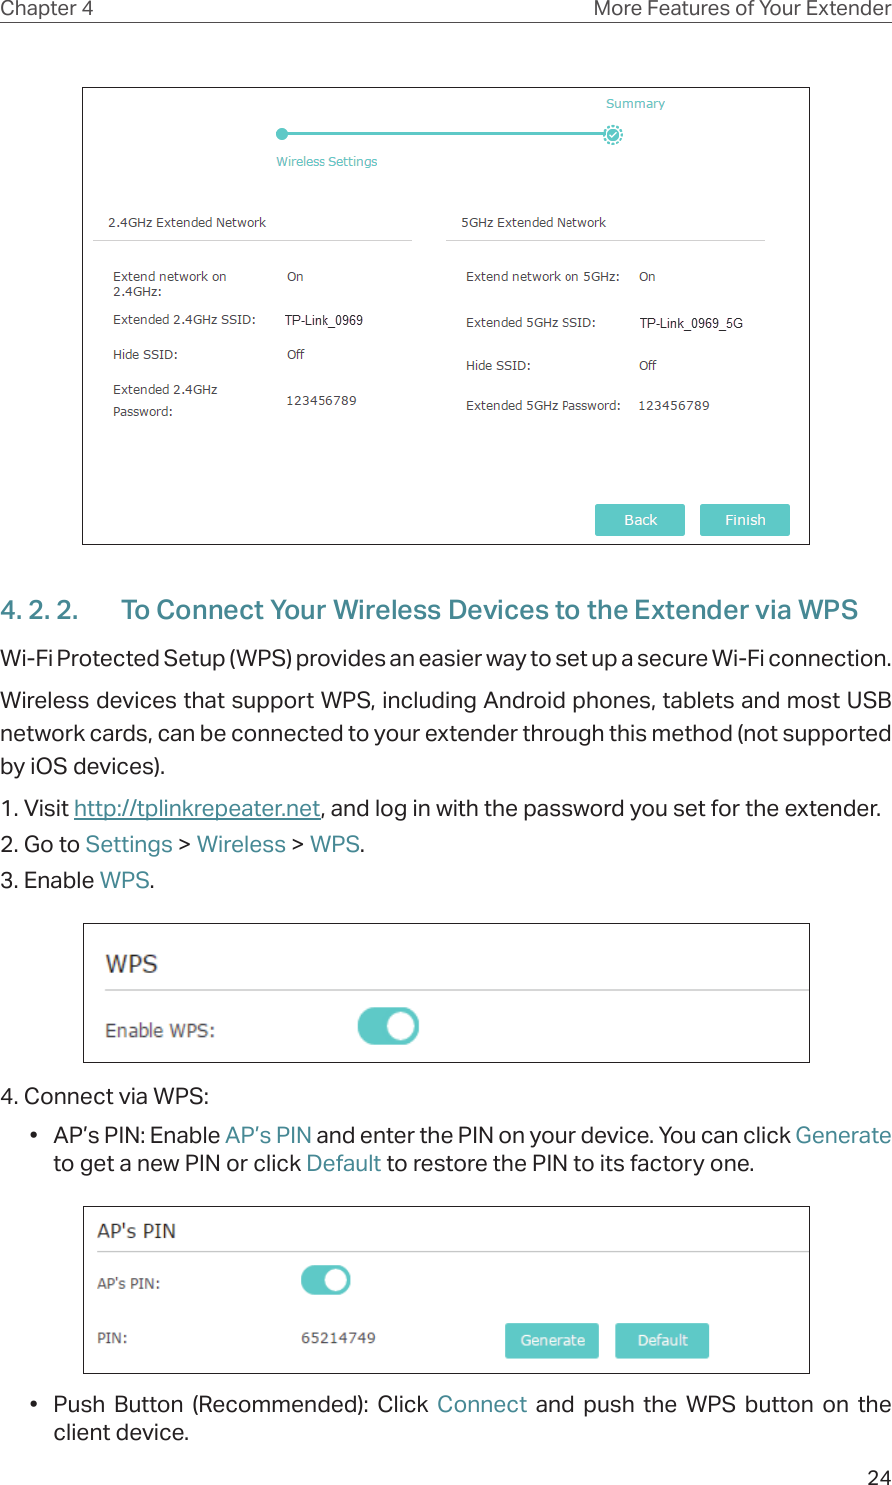 24Chapter 4 More Features of Your Extender4. 2. 2.  To Connect Your Wireless Devices to the Extender via WPSWi-Fi Protected Setup (WPS) provides an easier way to set up a secure Wi-Fi connection.Wireless devices that support WPS, including Android phones, tablets and most USB network cards, can be connected to your extender through this method (not supported by iOS devices).1. Visit http://tplinkrepeater.net, and log in with the password you set for the extender.2. Go to Settings &gt; Wireless &gt; WPS. 3. Enable WPS.4. Connect via WPS:•  AP’s PIN: Enable AP’s PIN and enter the PIN on your device. You can click Generate to get a new PIN or click Default to restore the PIN to its factory one.•  Push Button (Recommended): Click Connect and push the WPS button on the client device.